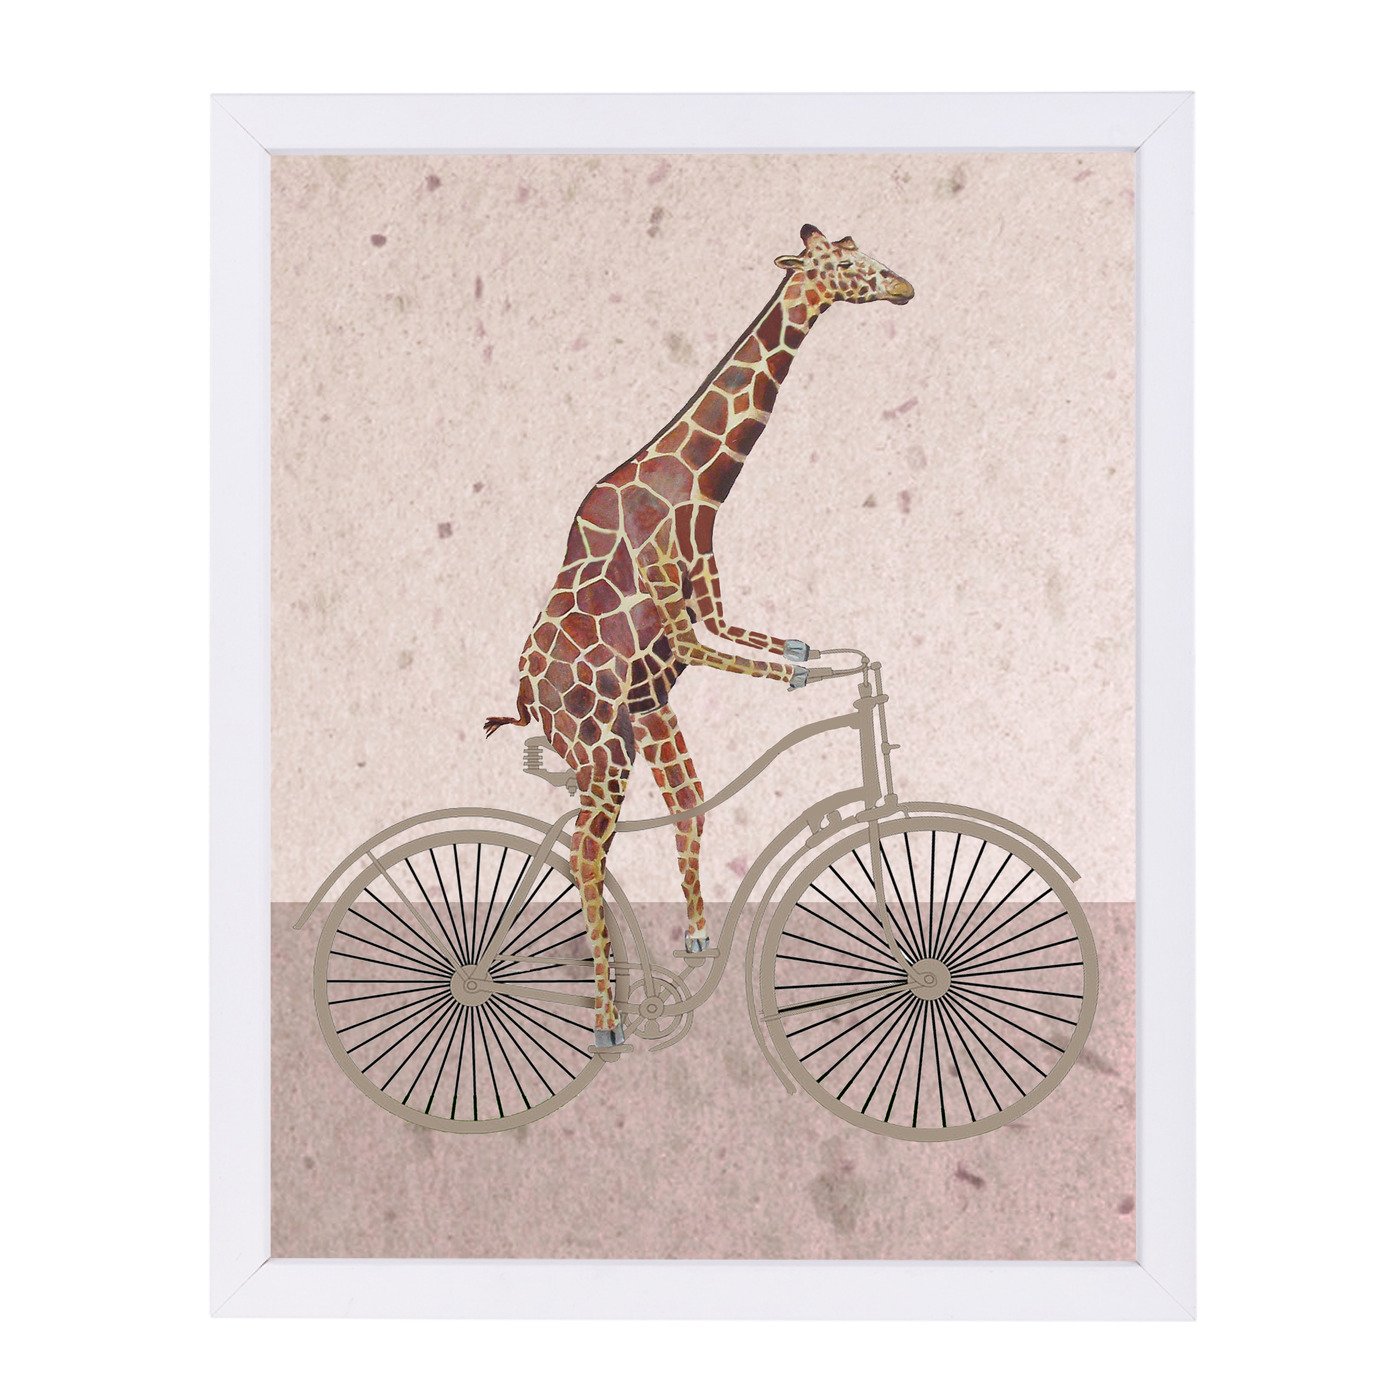 Giraffe On Bicycle By Coco De Paris - Framed Print - Americanflat